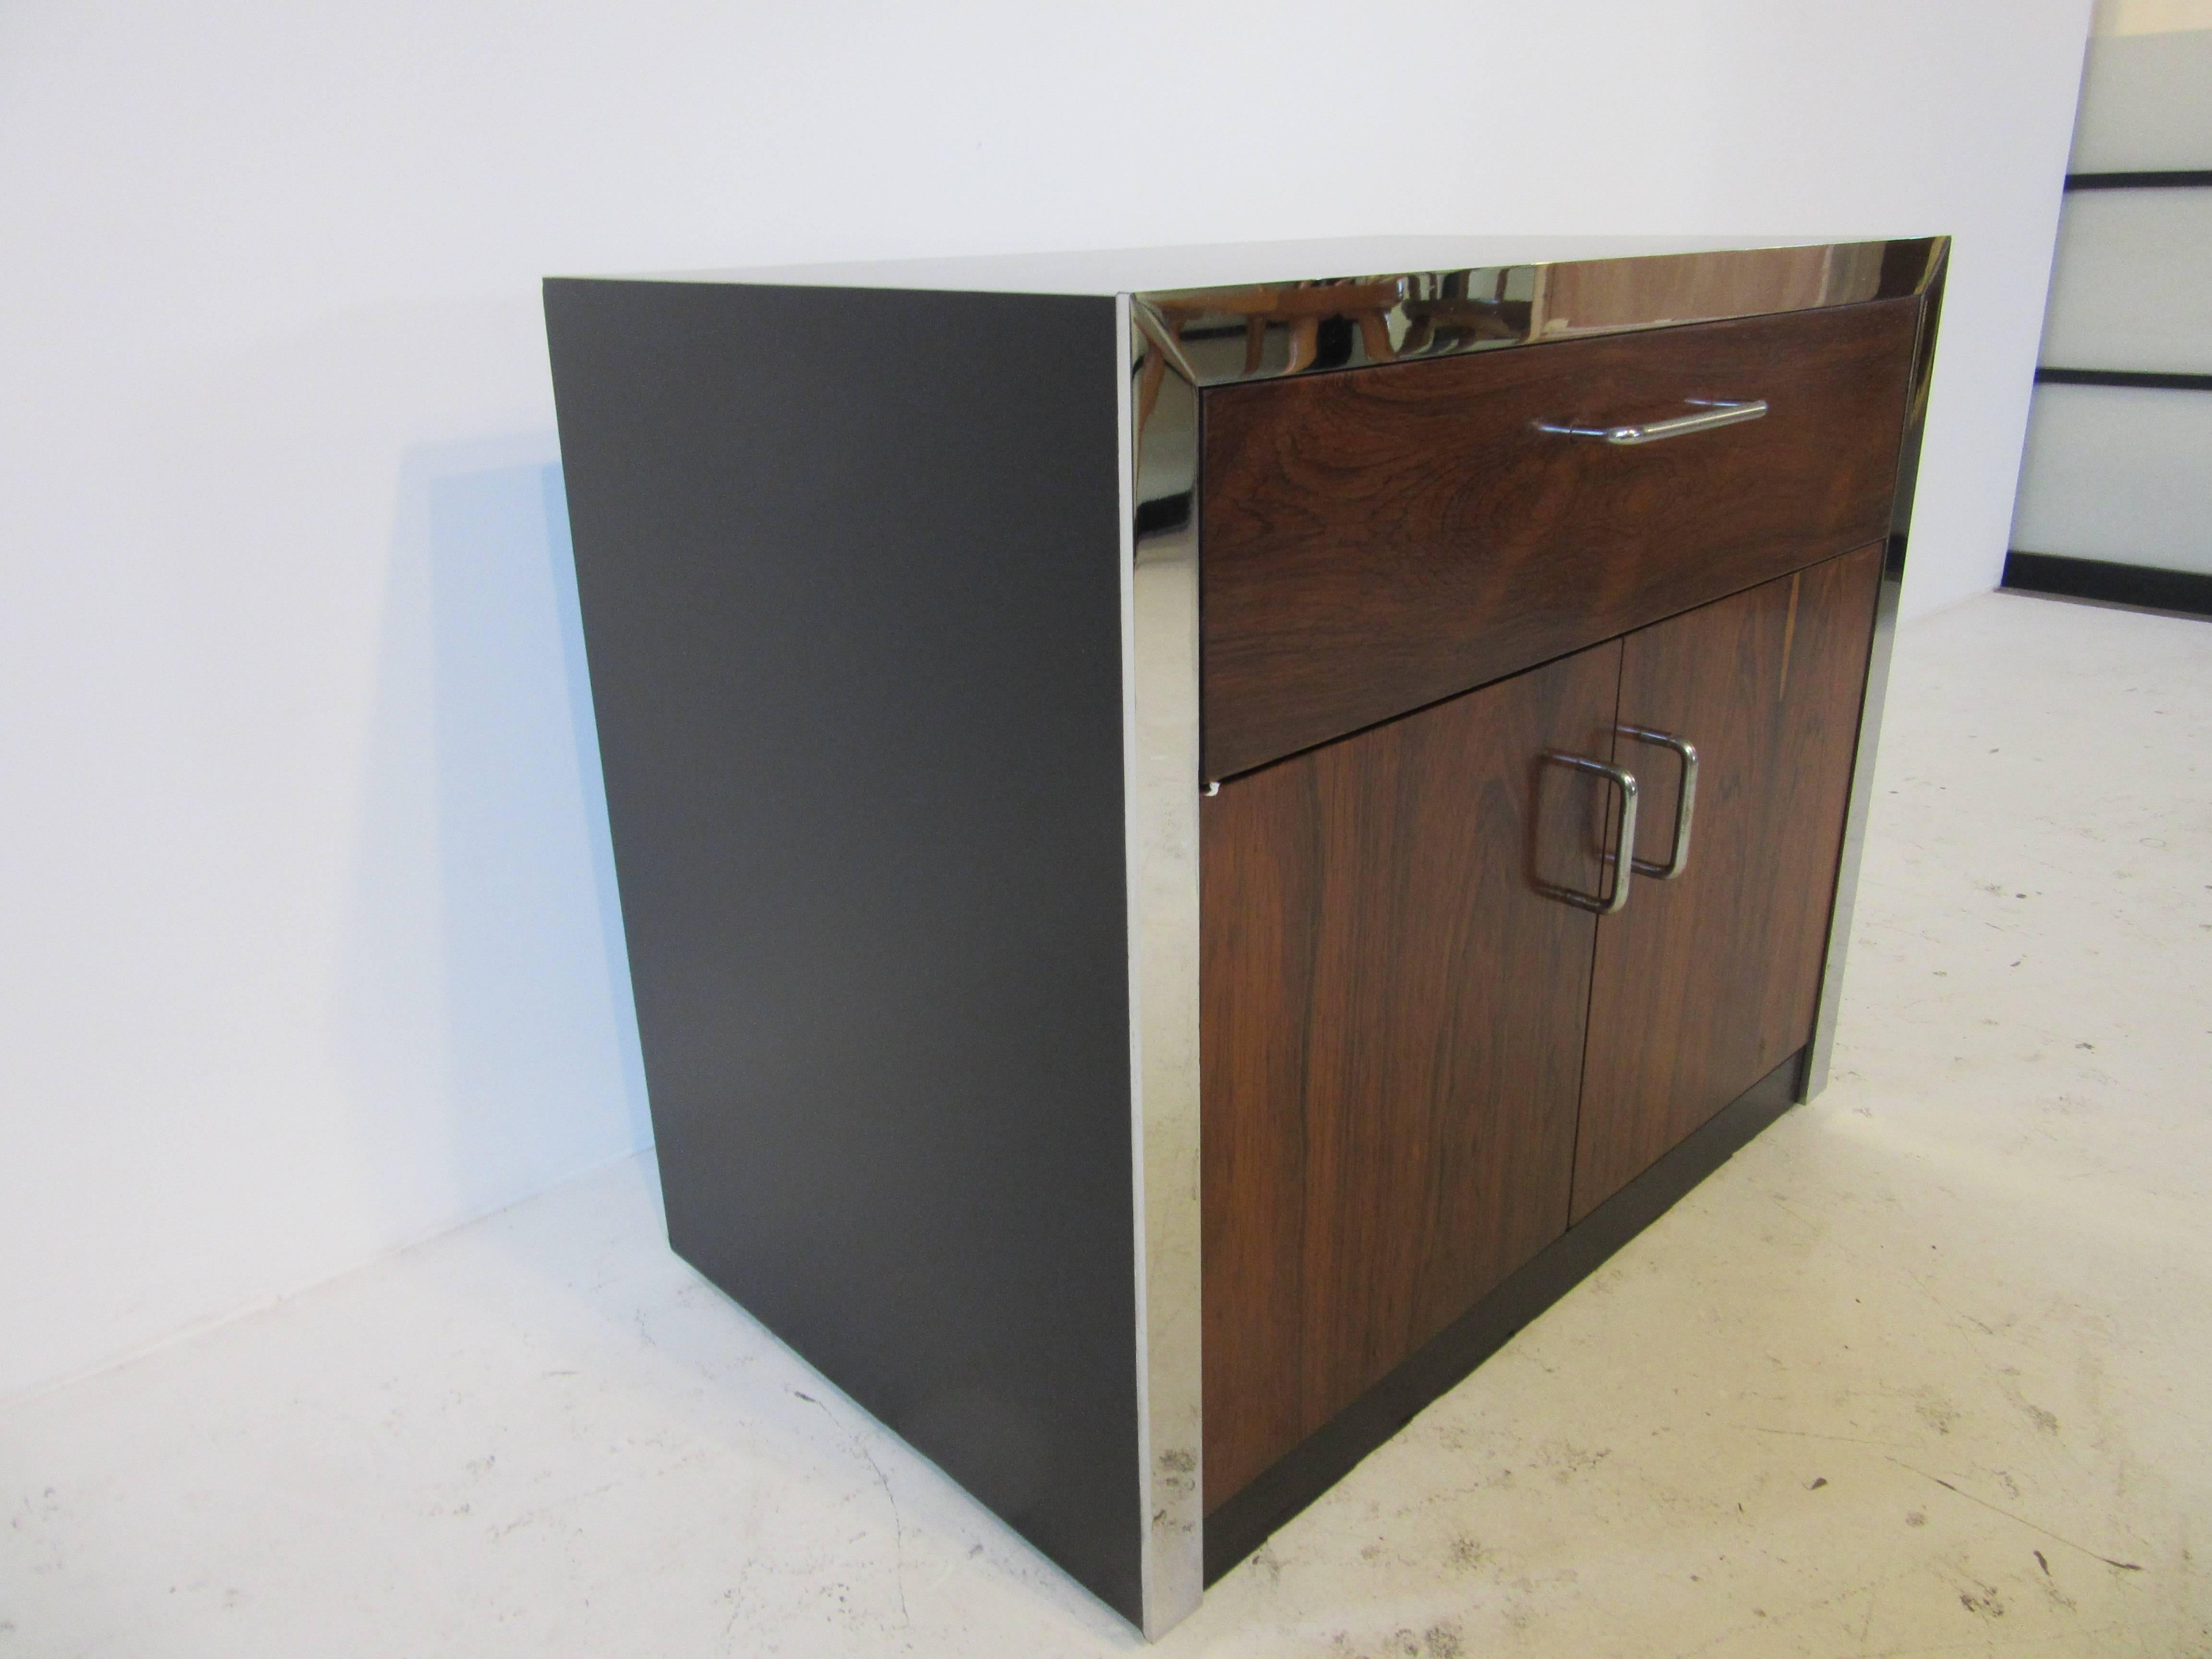 A 1970s Brazilian rosewood nightstand with top drawer and lower double doors with storage. Detail chrome trim surrounds the front with a satin black wood cabinet and chrome pulls. Designed in the style of Milo Baughman.